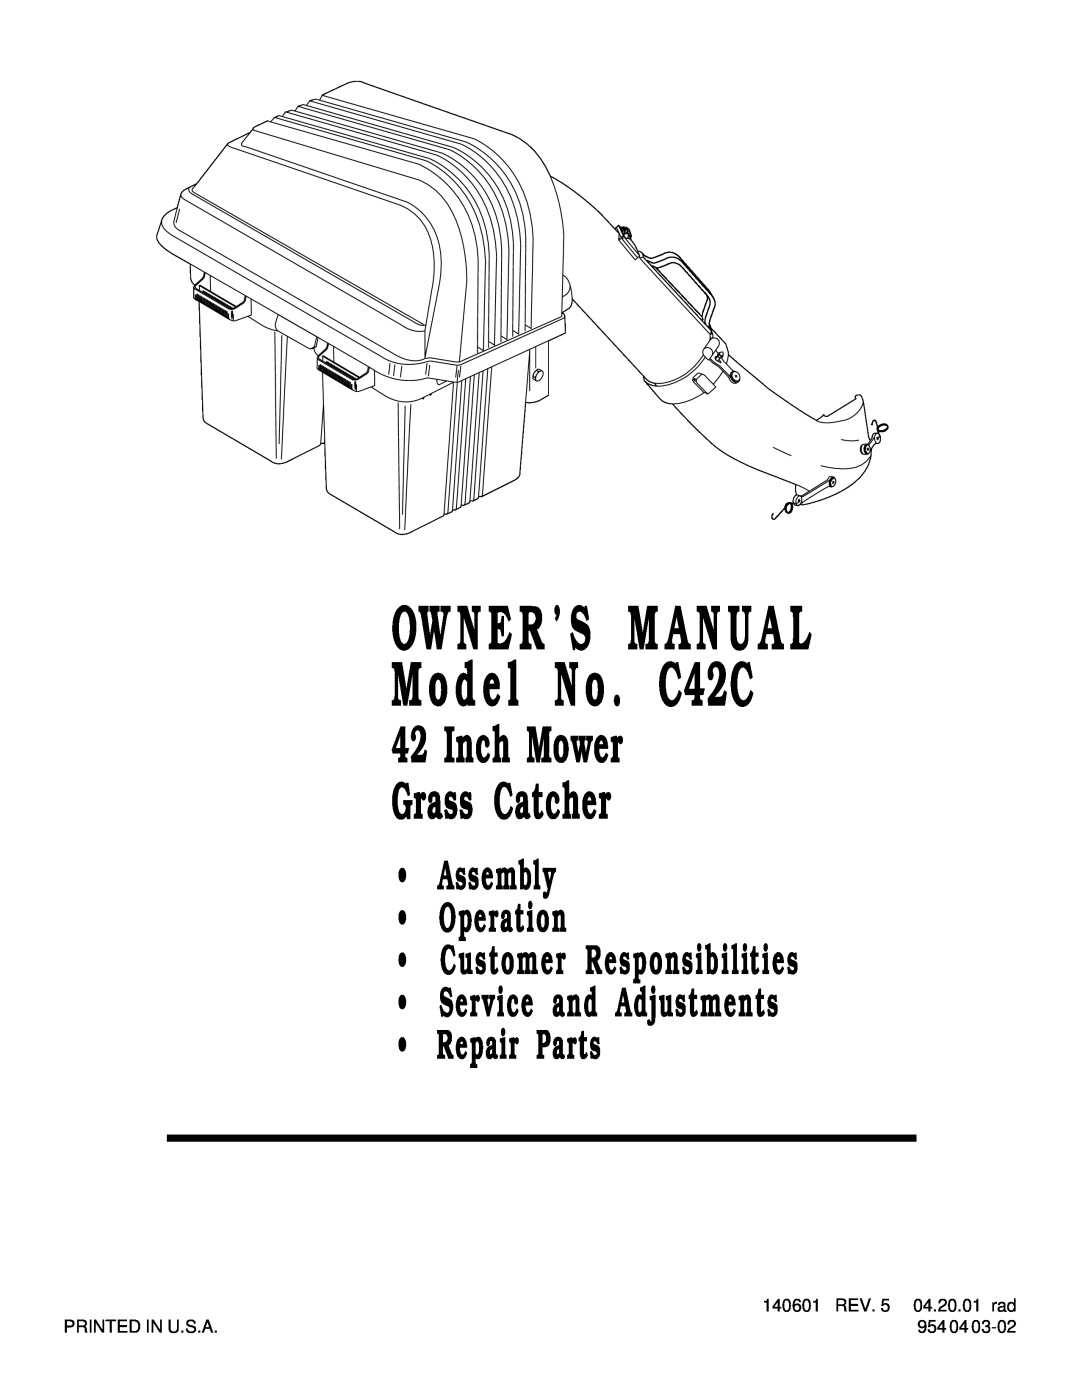 Husqvarna C42C owner manual Inch Mower Grass Catcher, Assembly Operation Customer Responsibilities Service and Adjustments 